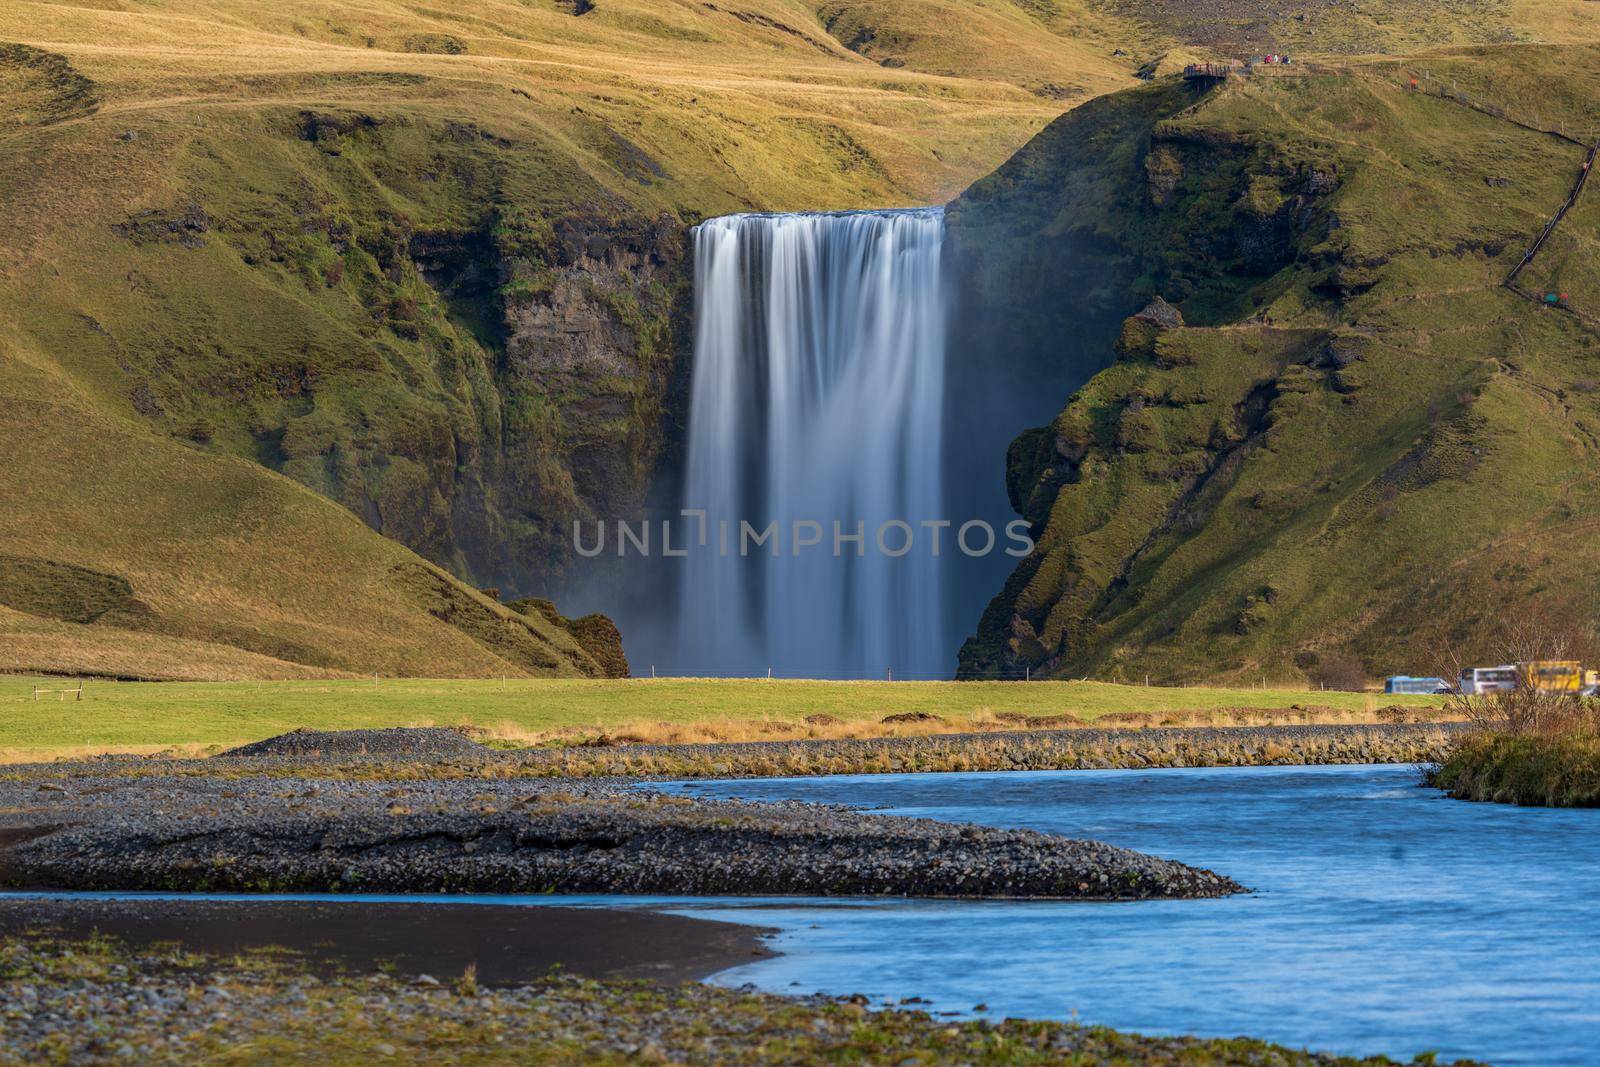 Long exposure of Skogafoss waterfall in Iceland from the distance with tourists hiking and blurred cars